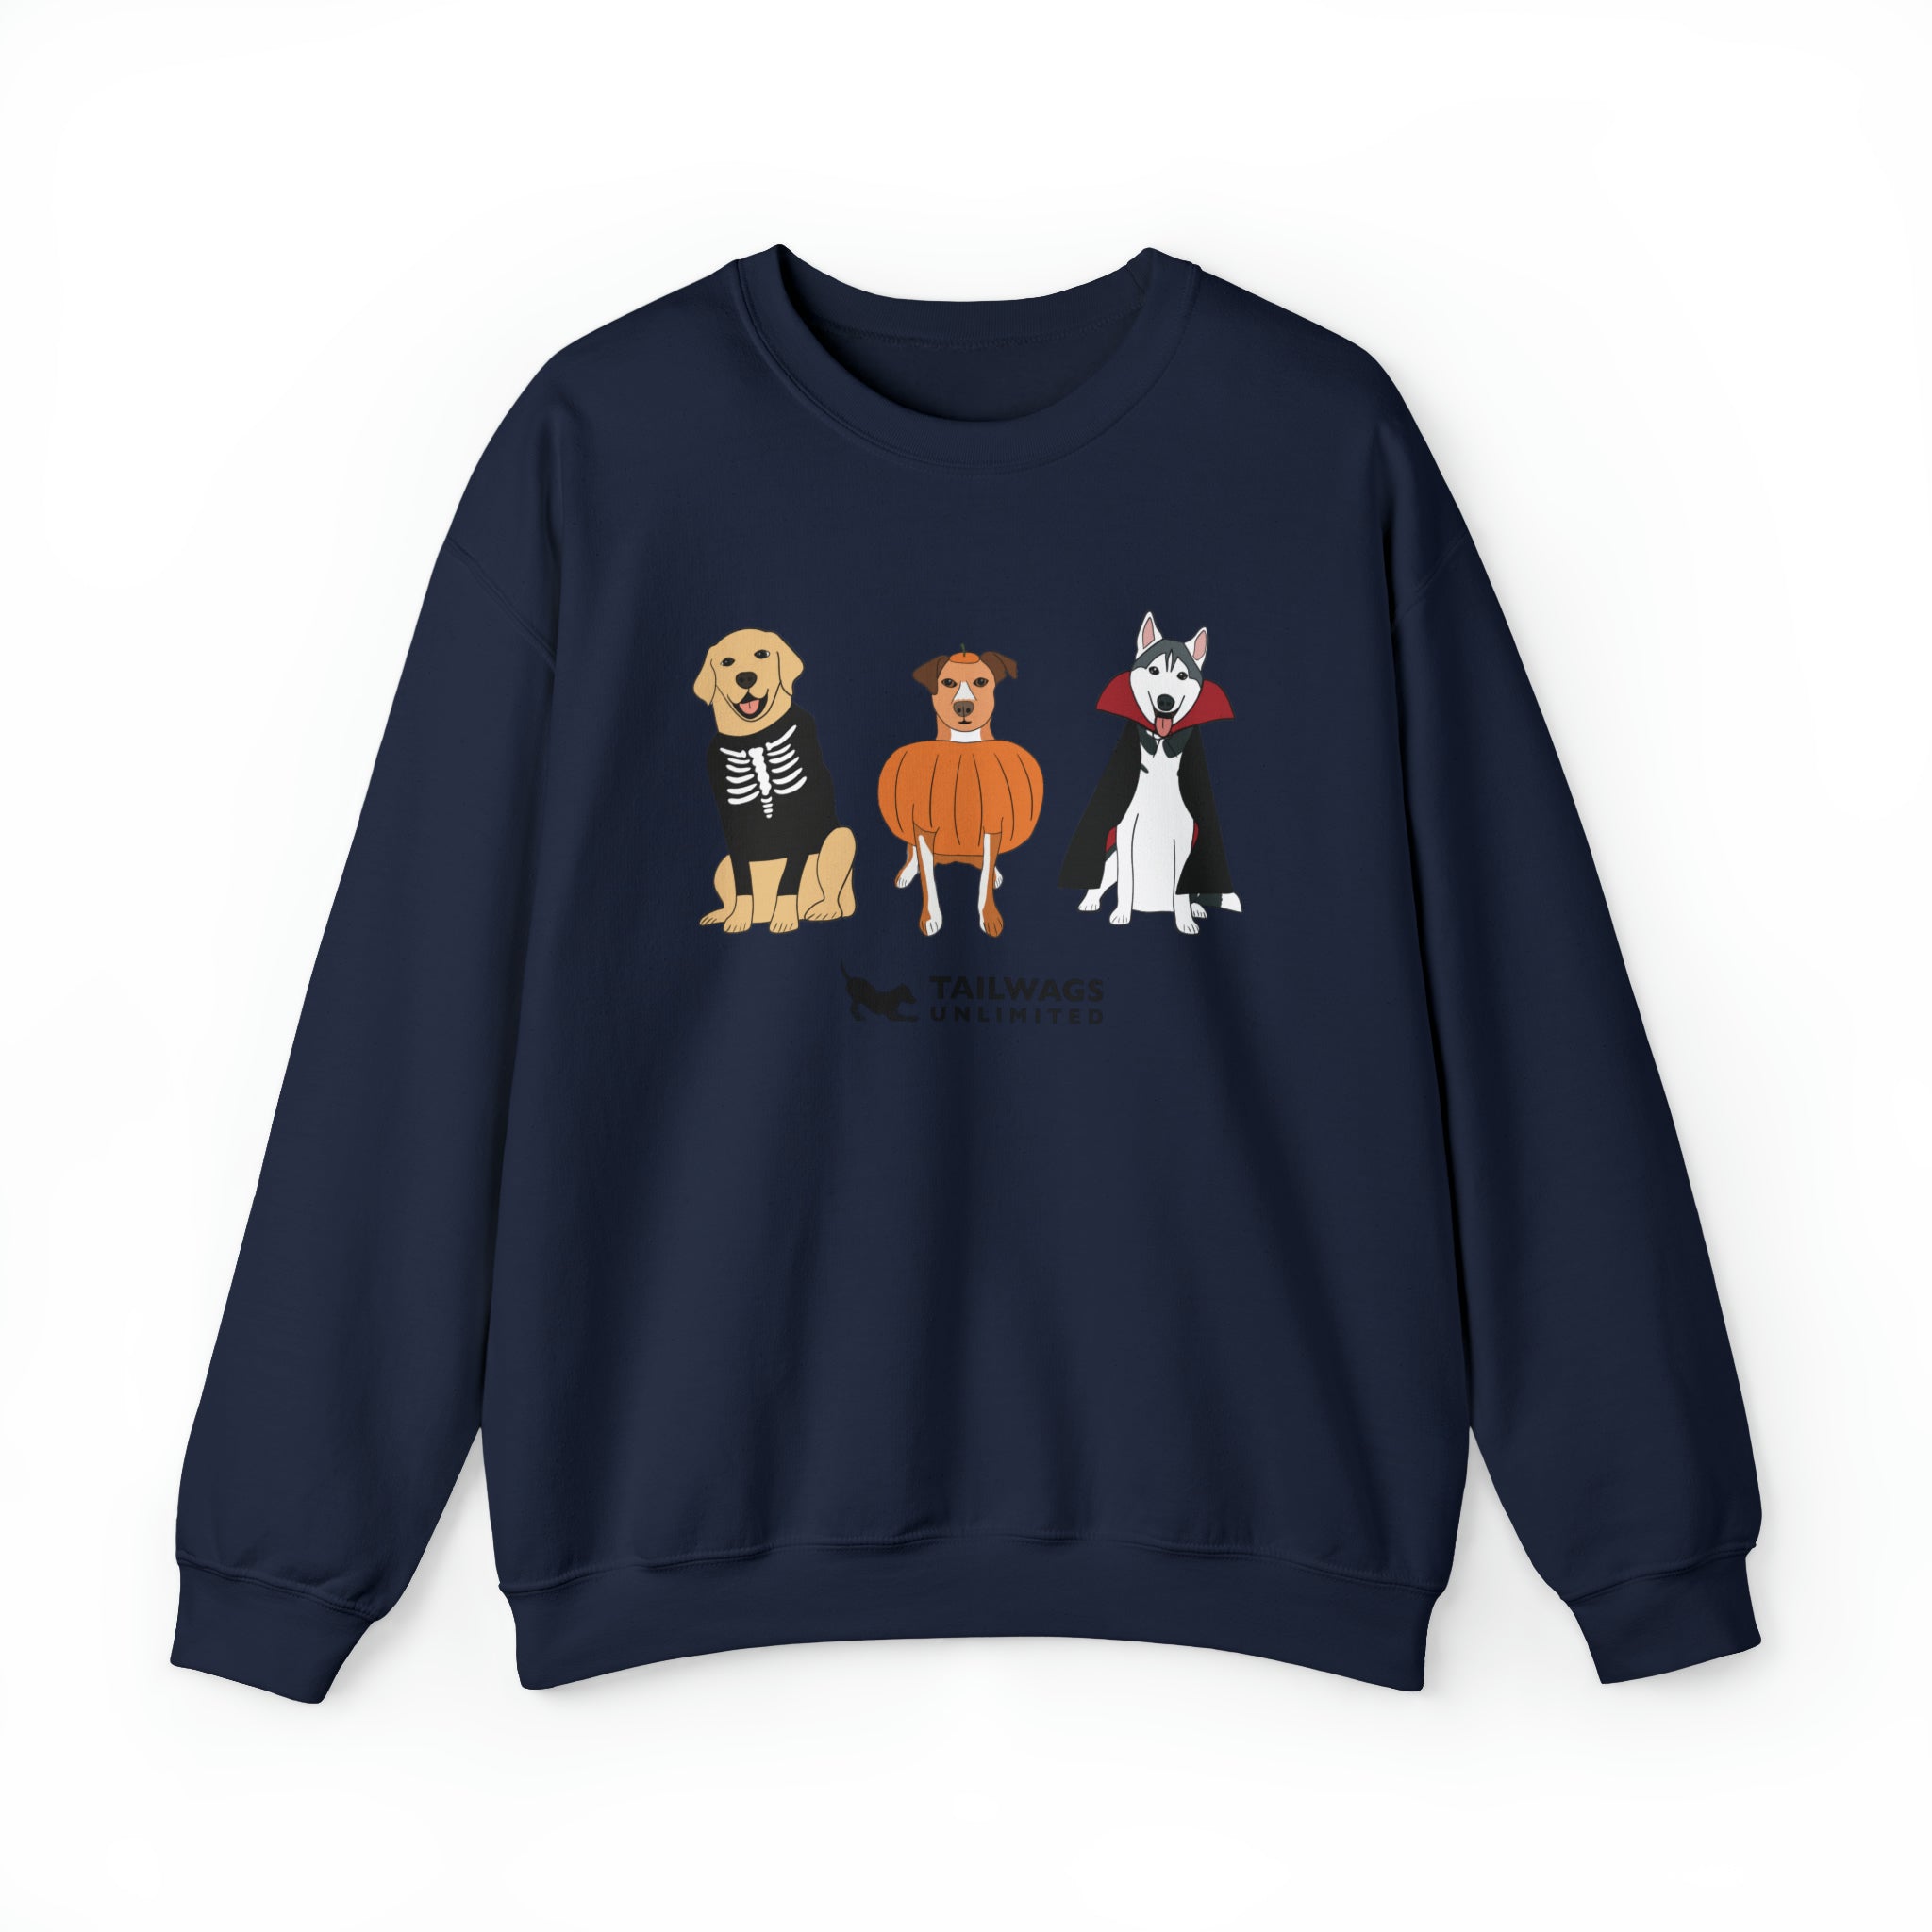 Dogs in Costume Crewneck Sweatshirt - TAILWAGS UNLIMITED